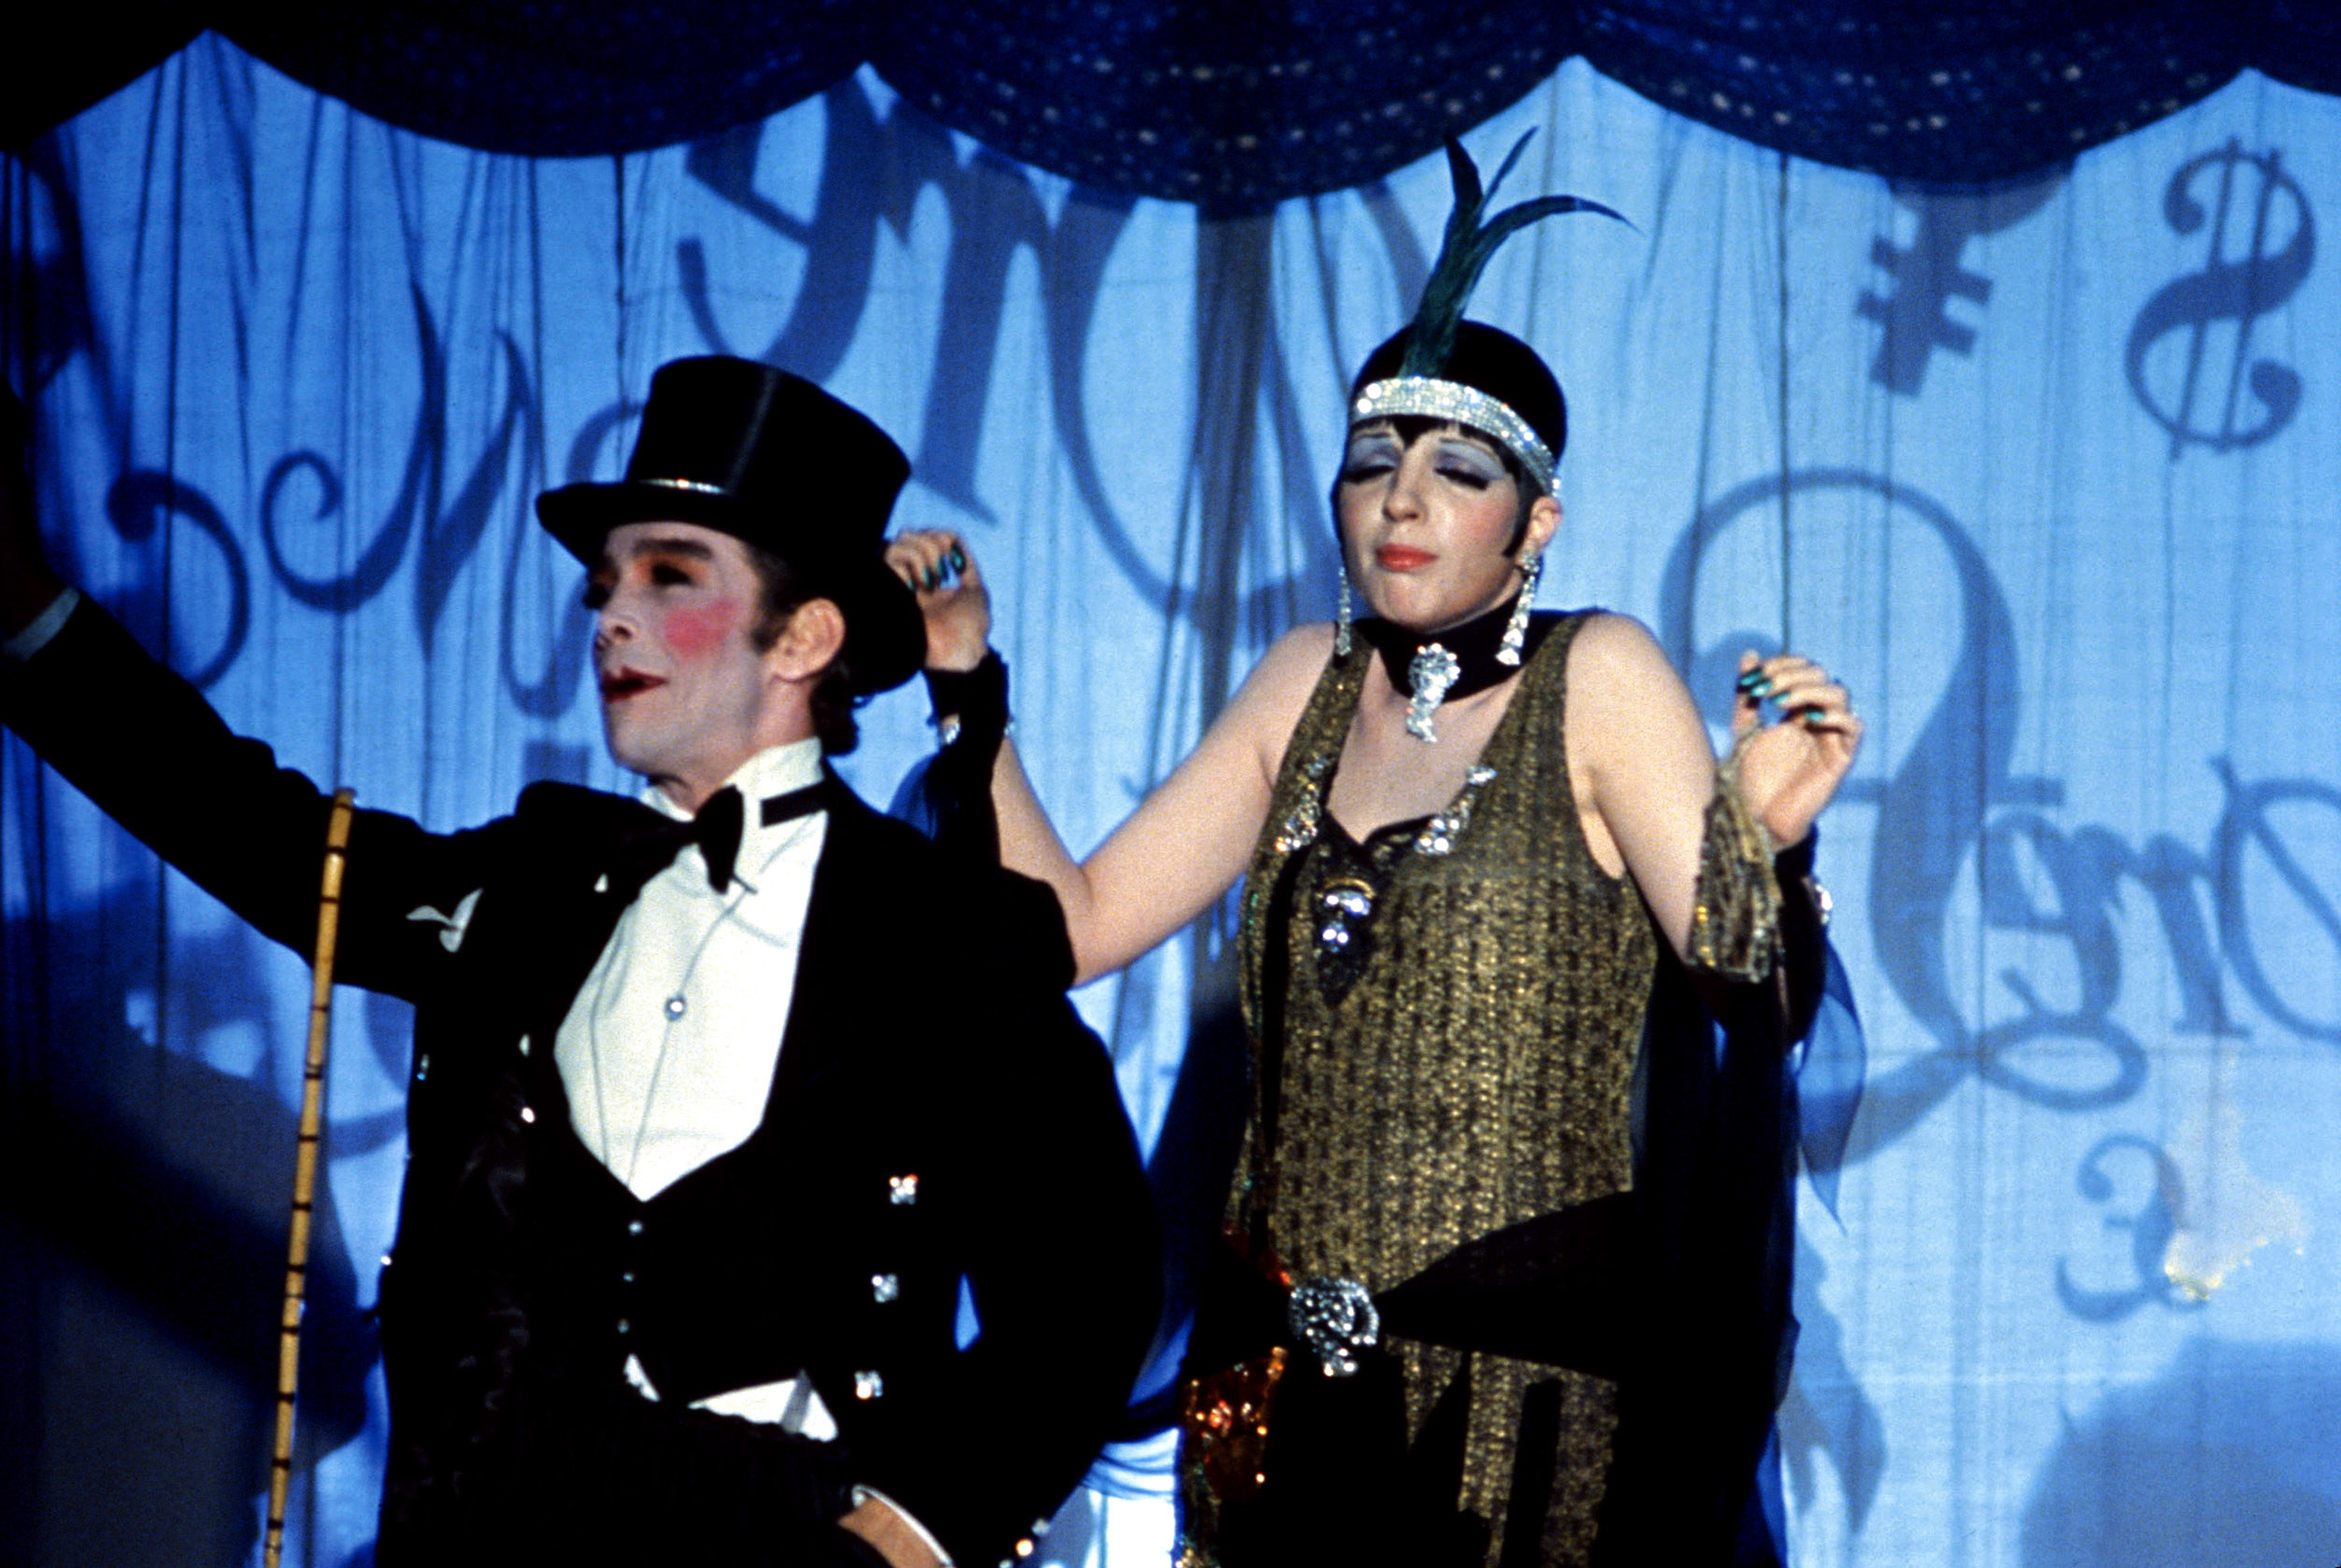 Joel Grey as the Emcee performing with Liza Minelli